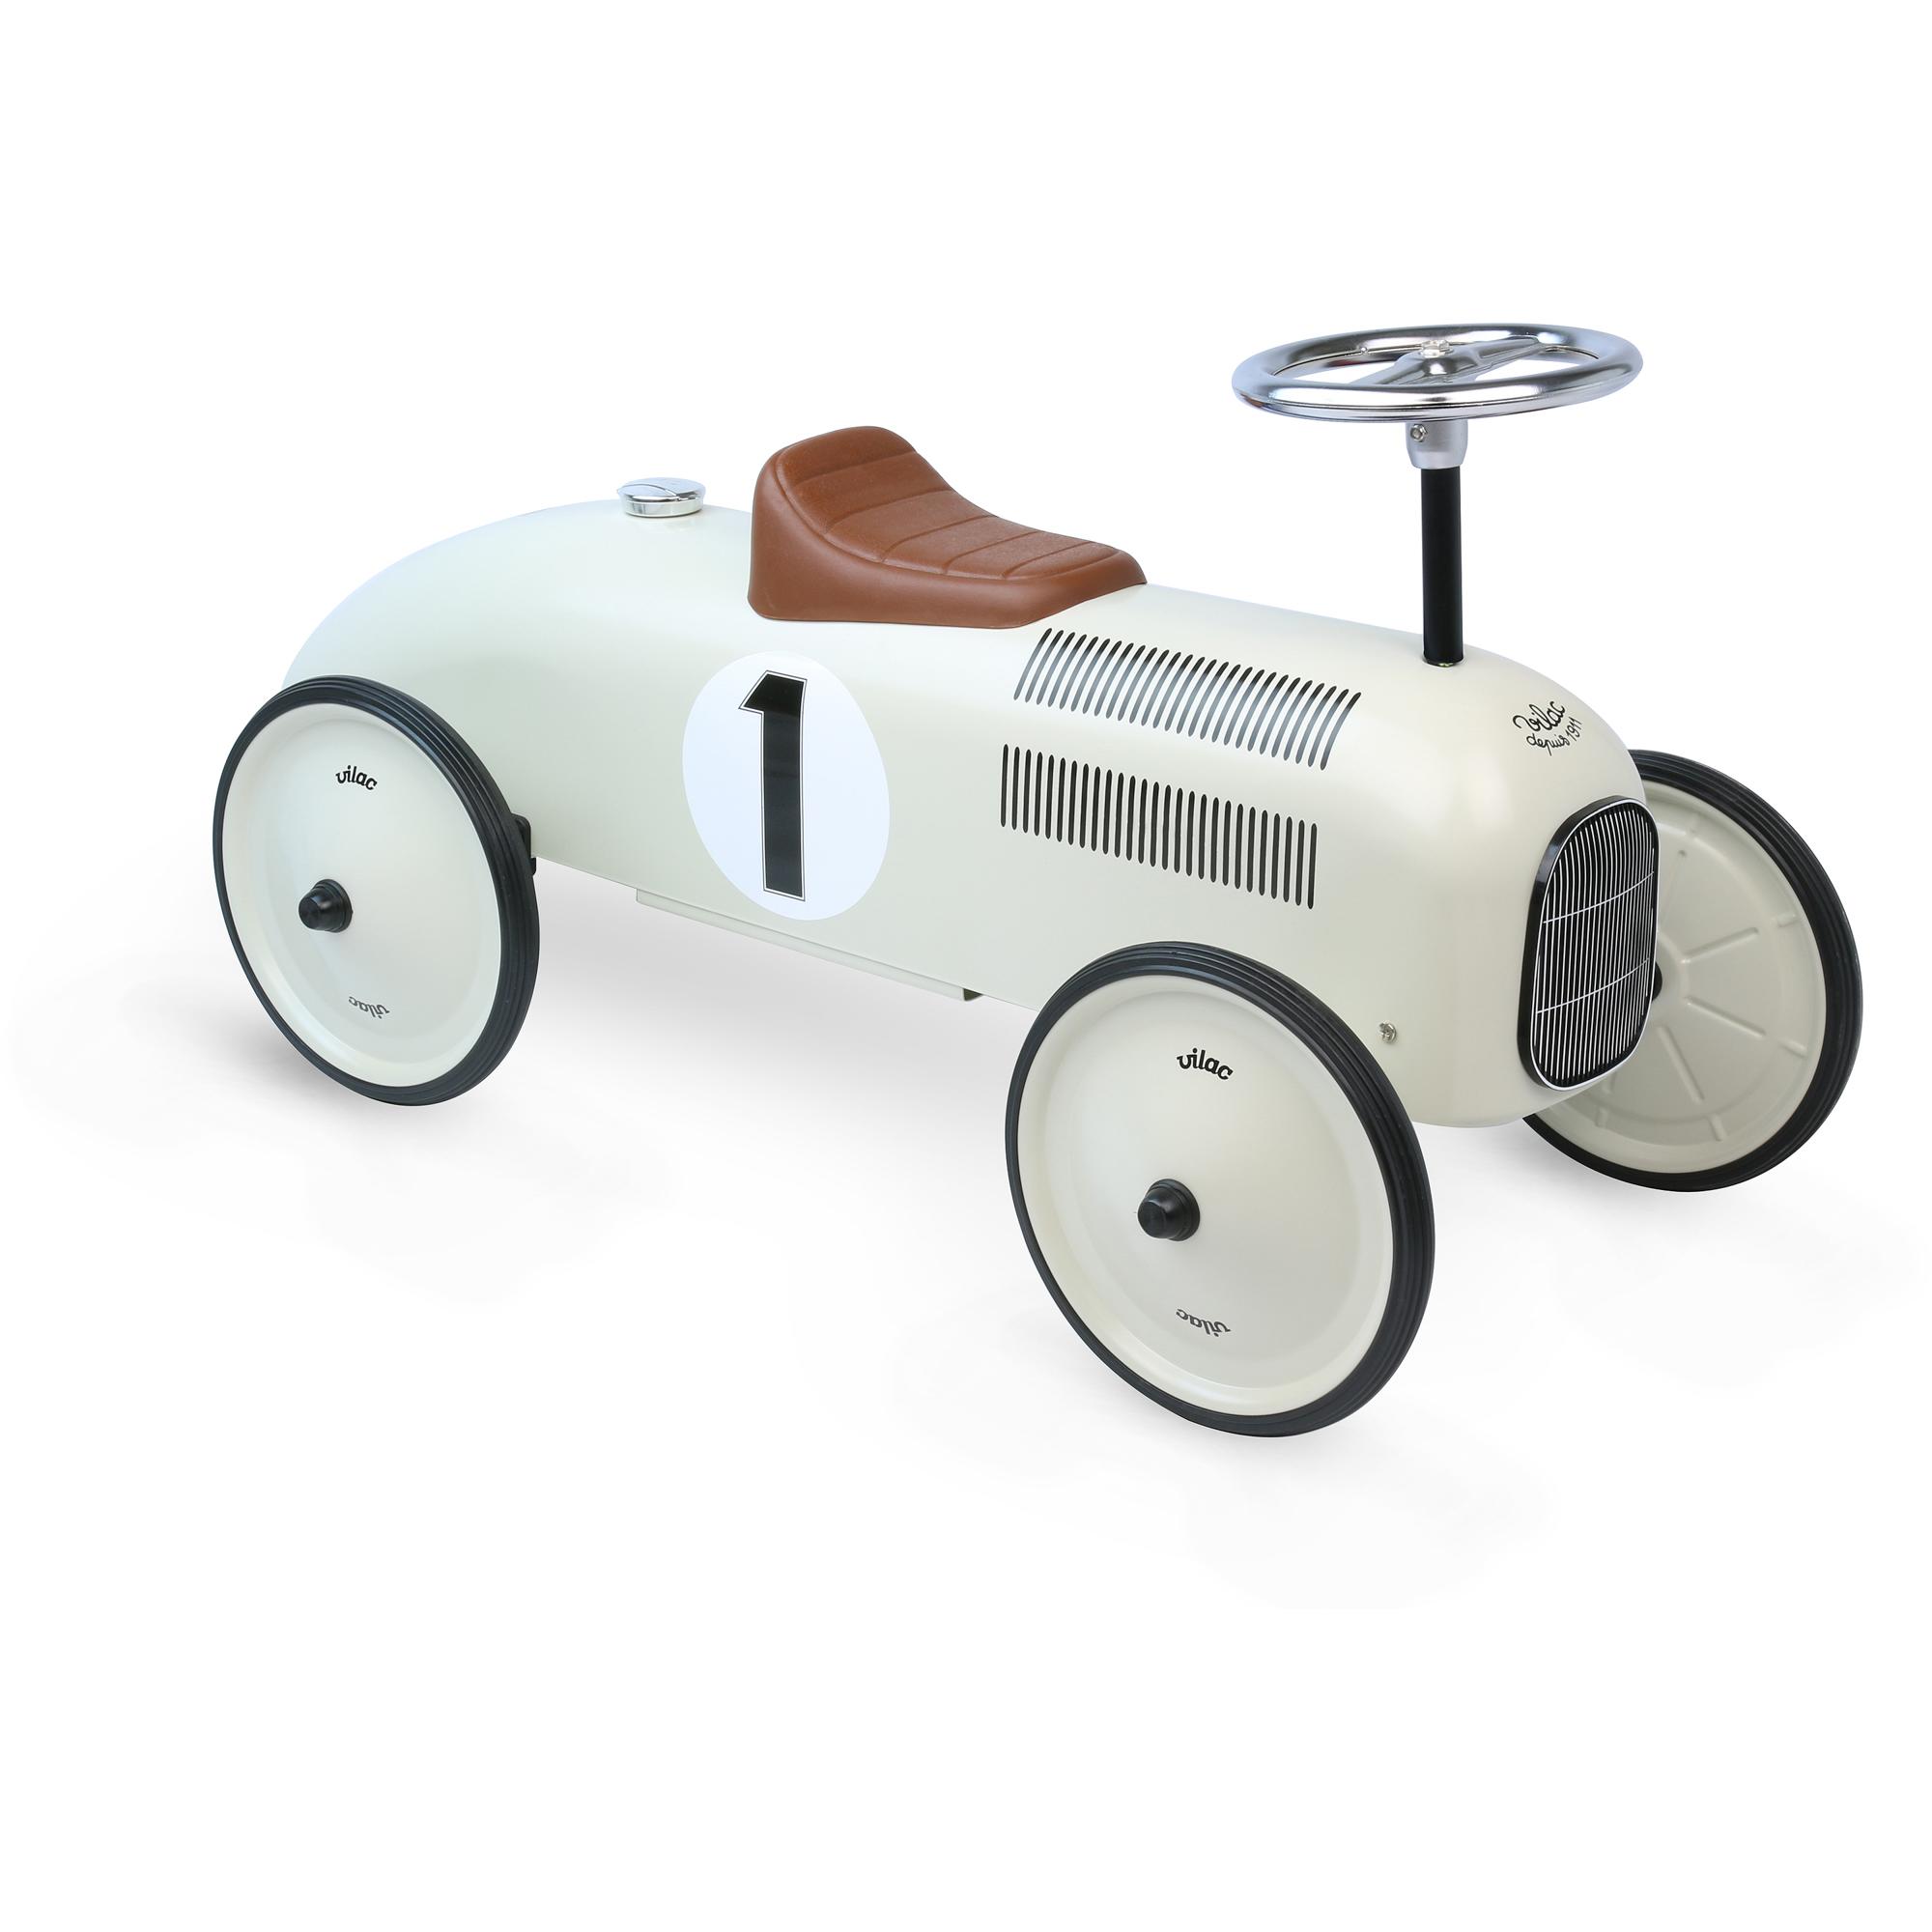 Off-white metal Vilac ride-on car with brown leatherette seat.